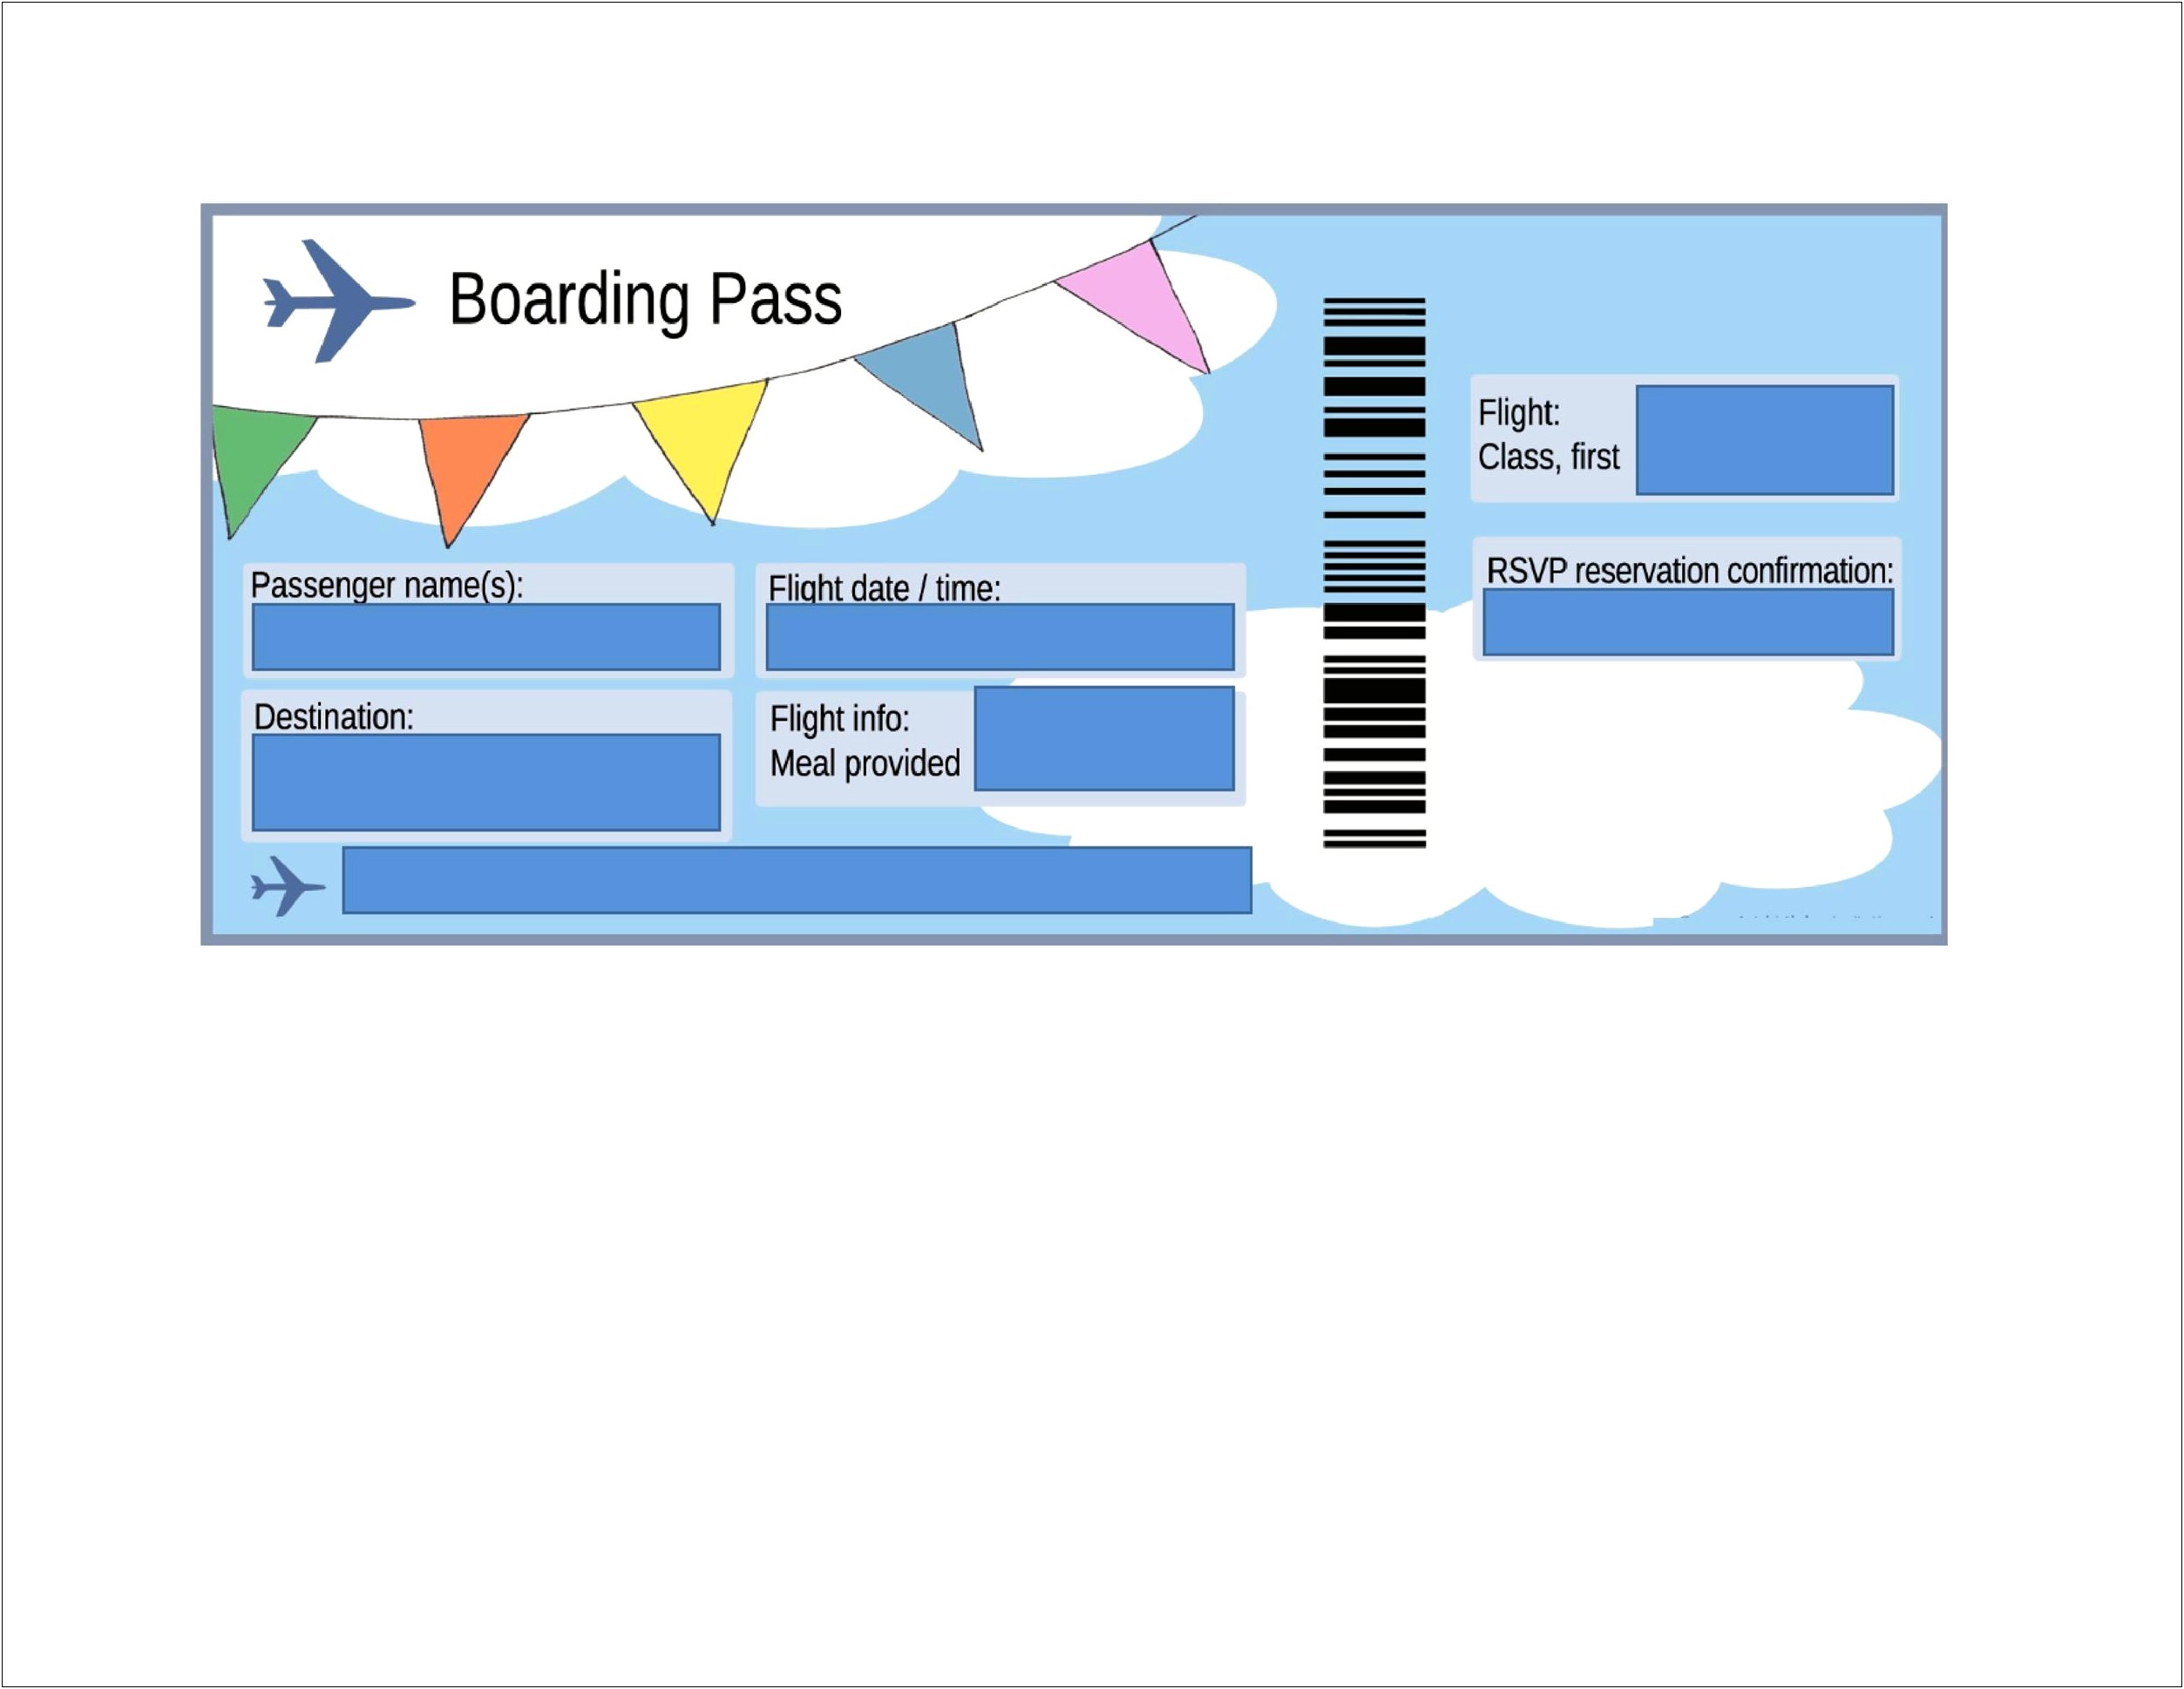 free-printable-cruise-boarding-pass-template-templates-resume